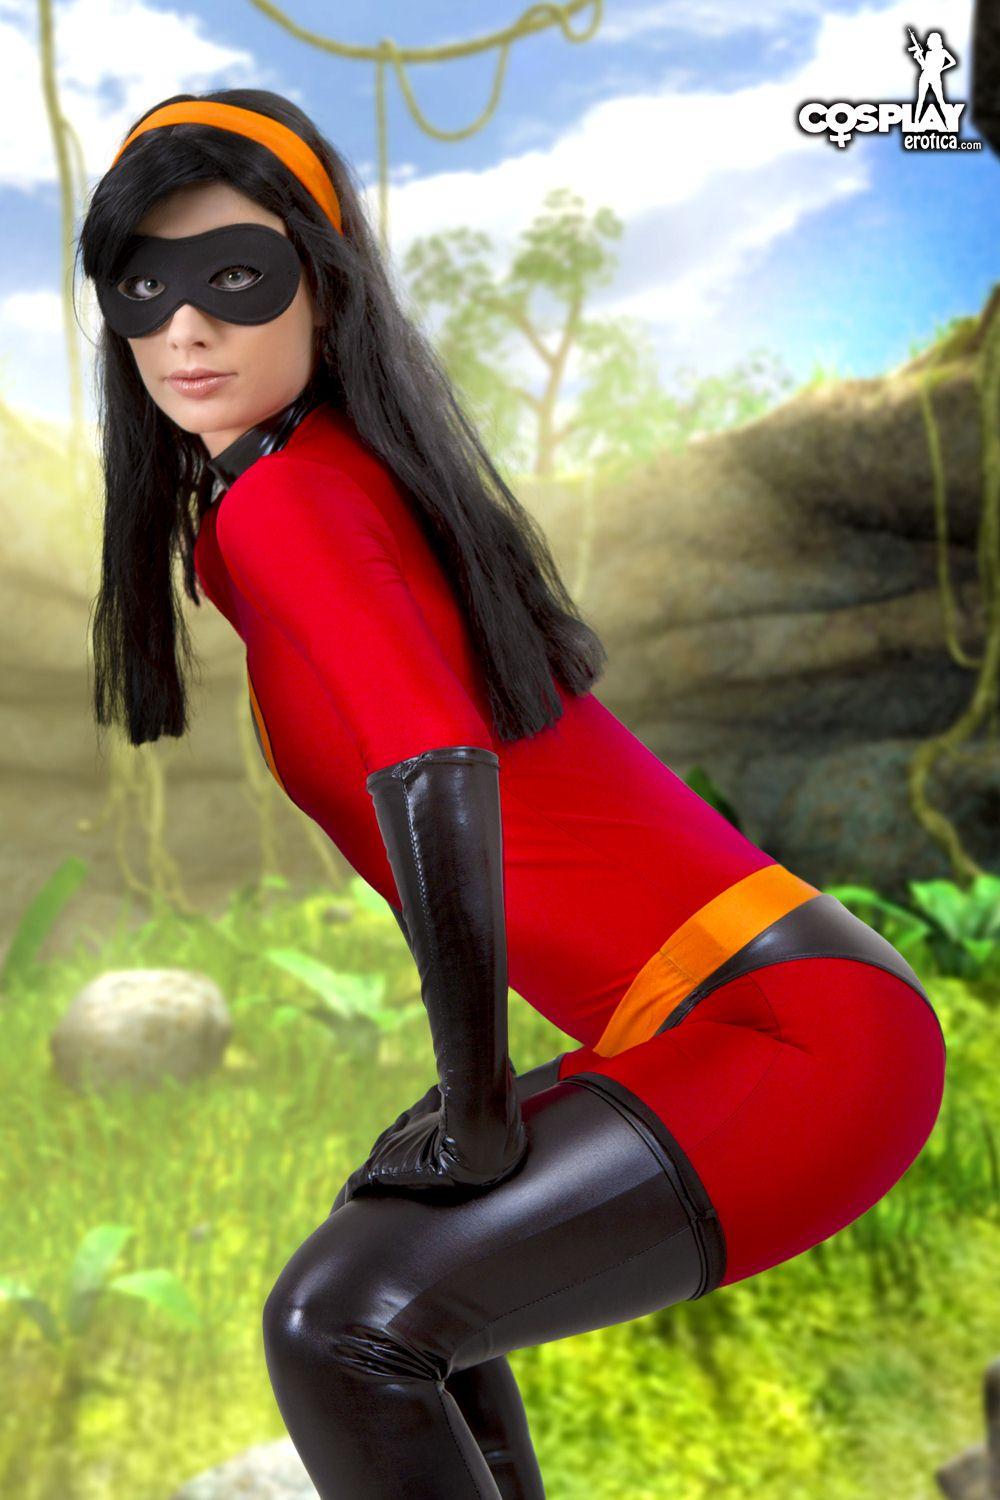 Pictures of cosplayer Marylin dressed as Violet from The Incredibles #59427749